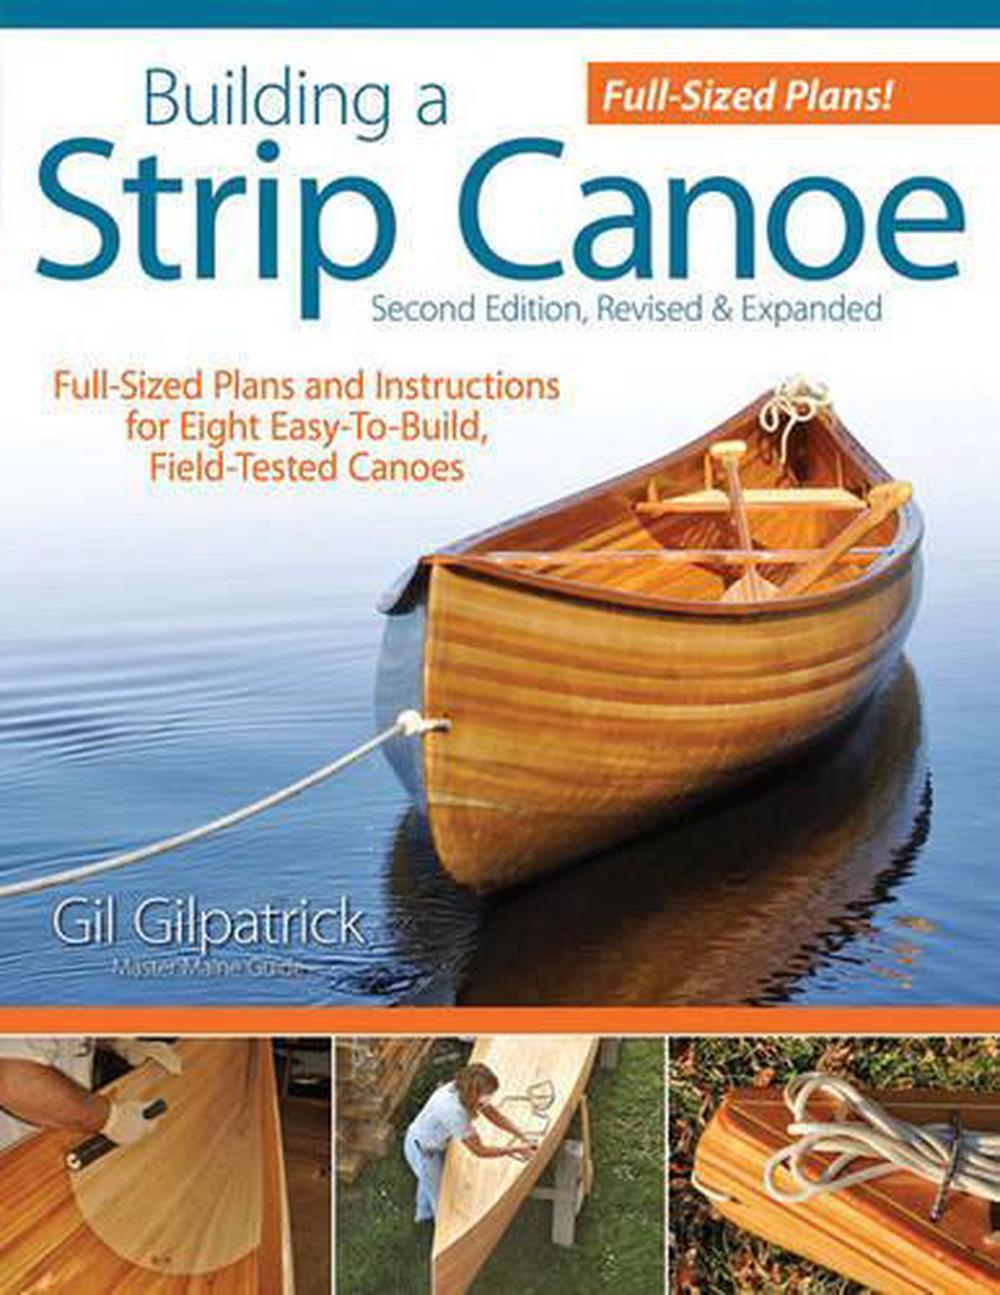 building a strip canoe: full-sized plans and instructions